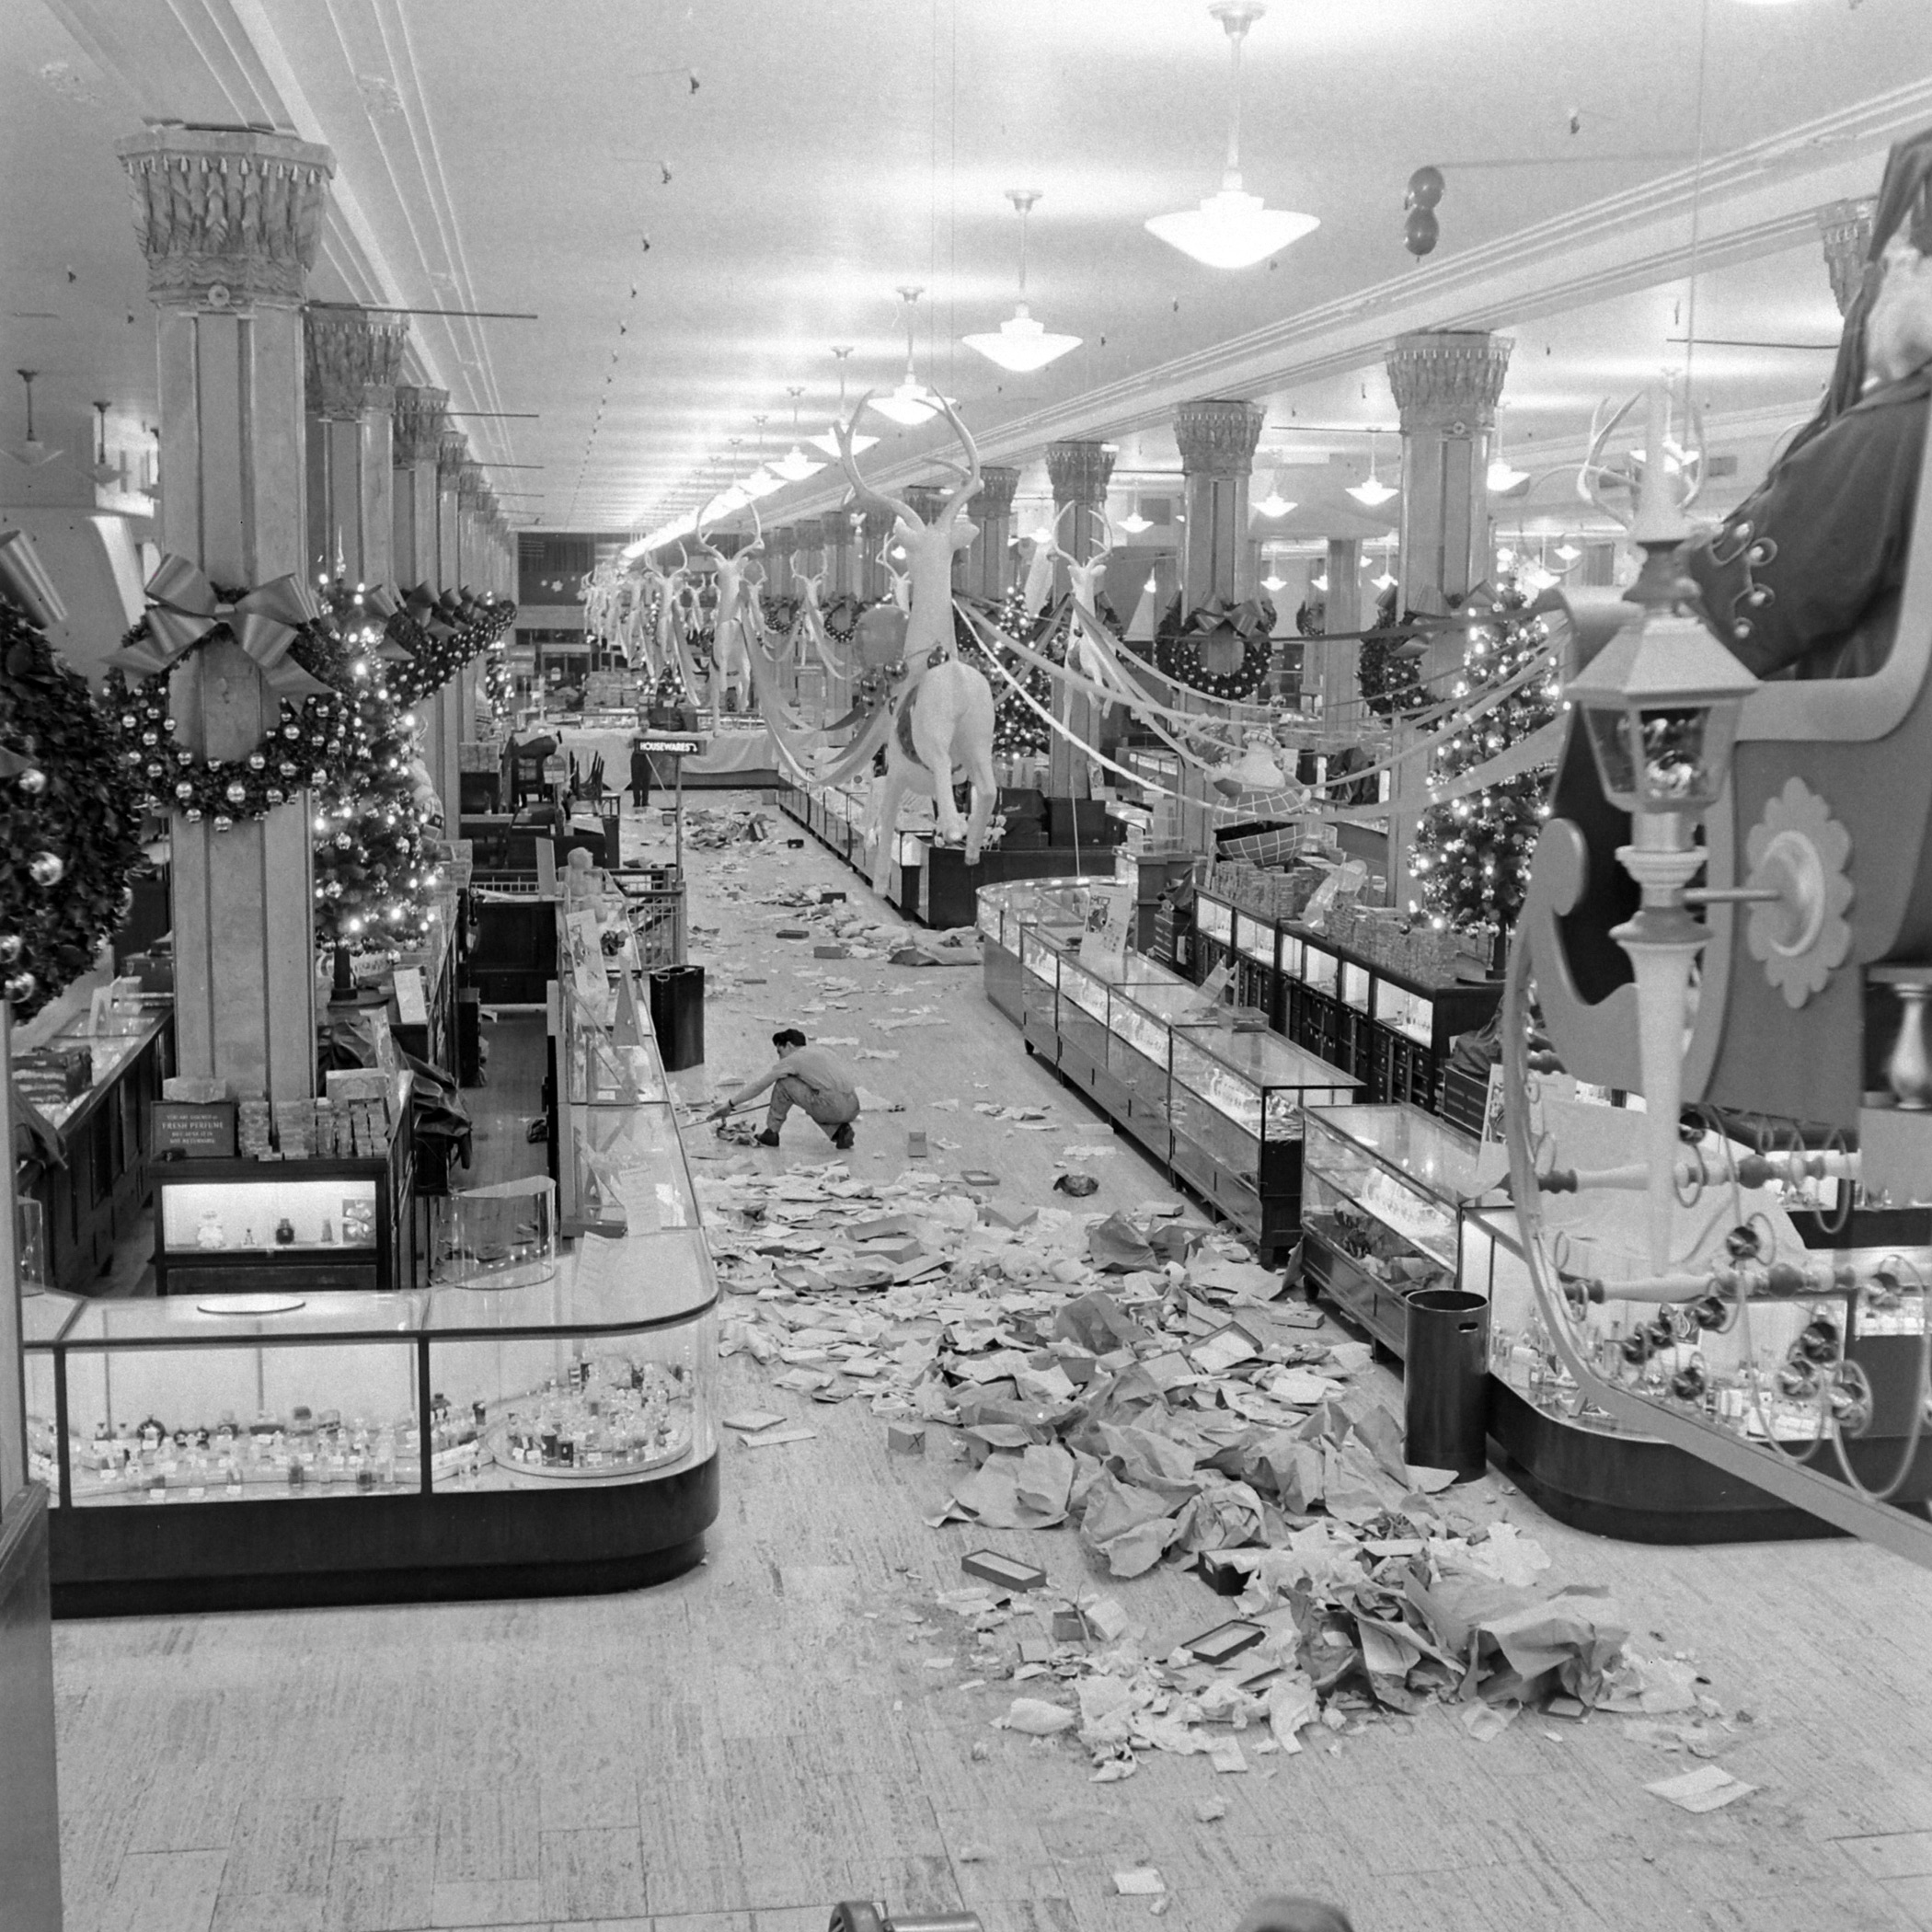 The mess in the wake of a major sale day at Macy's. New York, 1948.